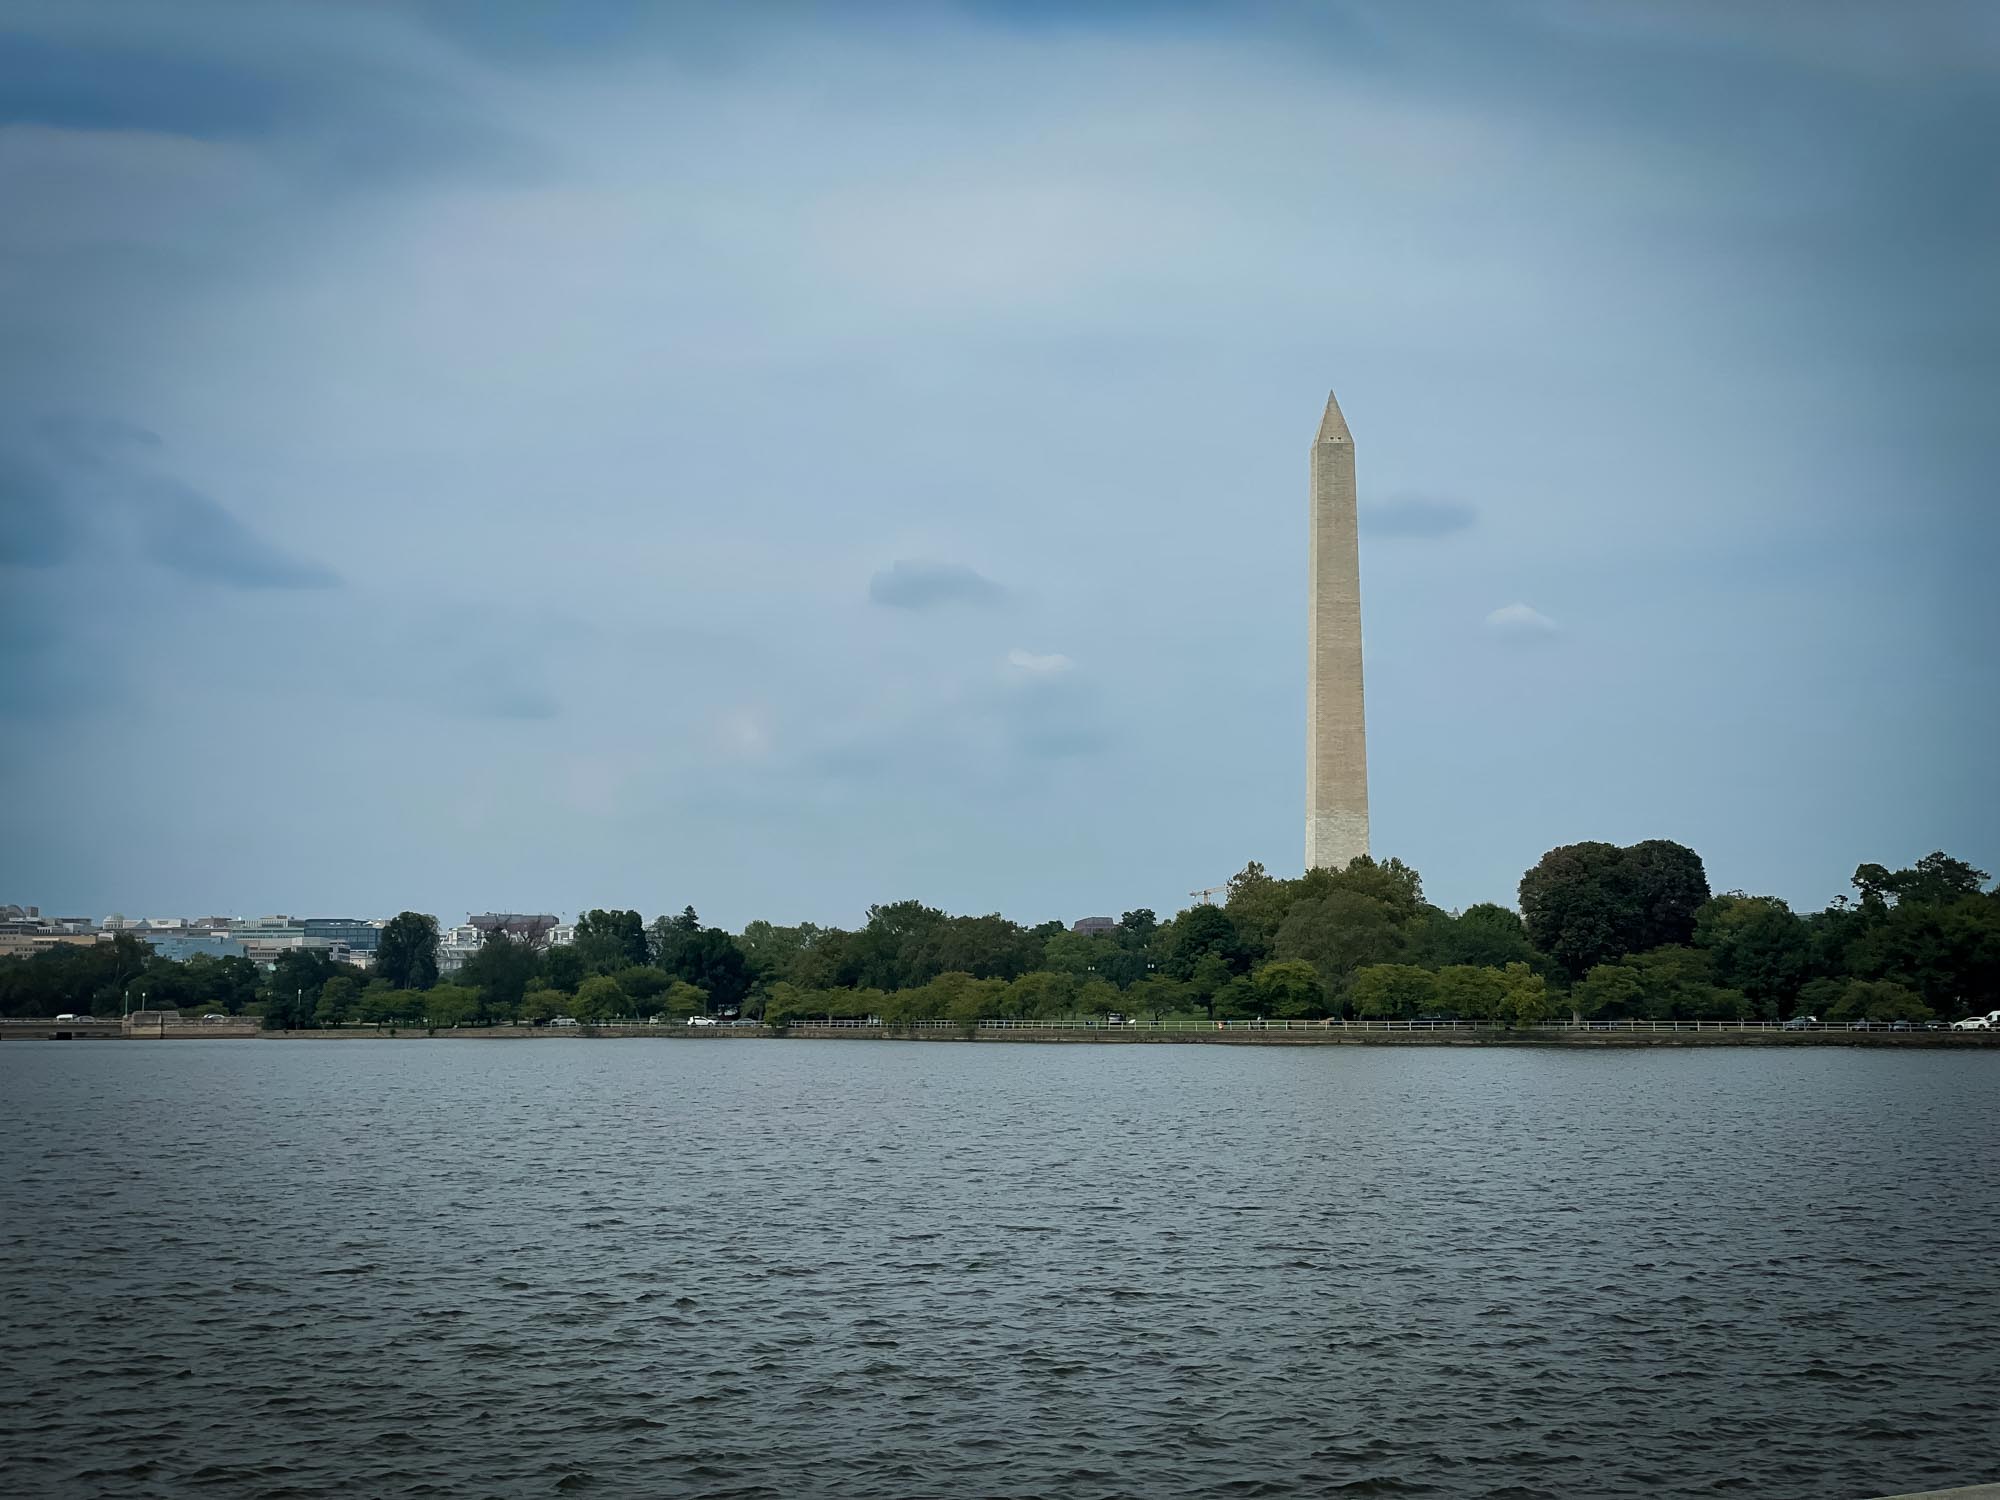 The Washington Memorial in the background with a body of water in the foreground